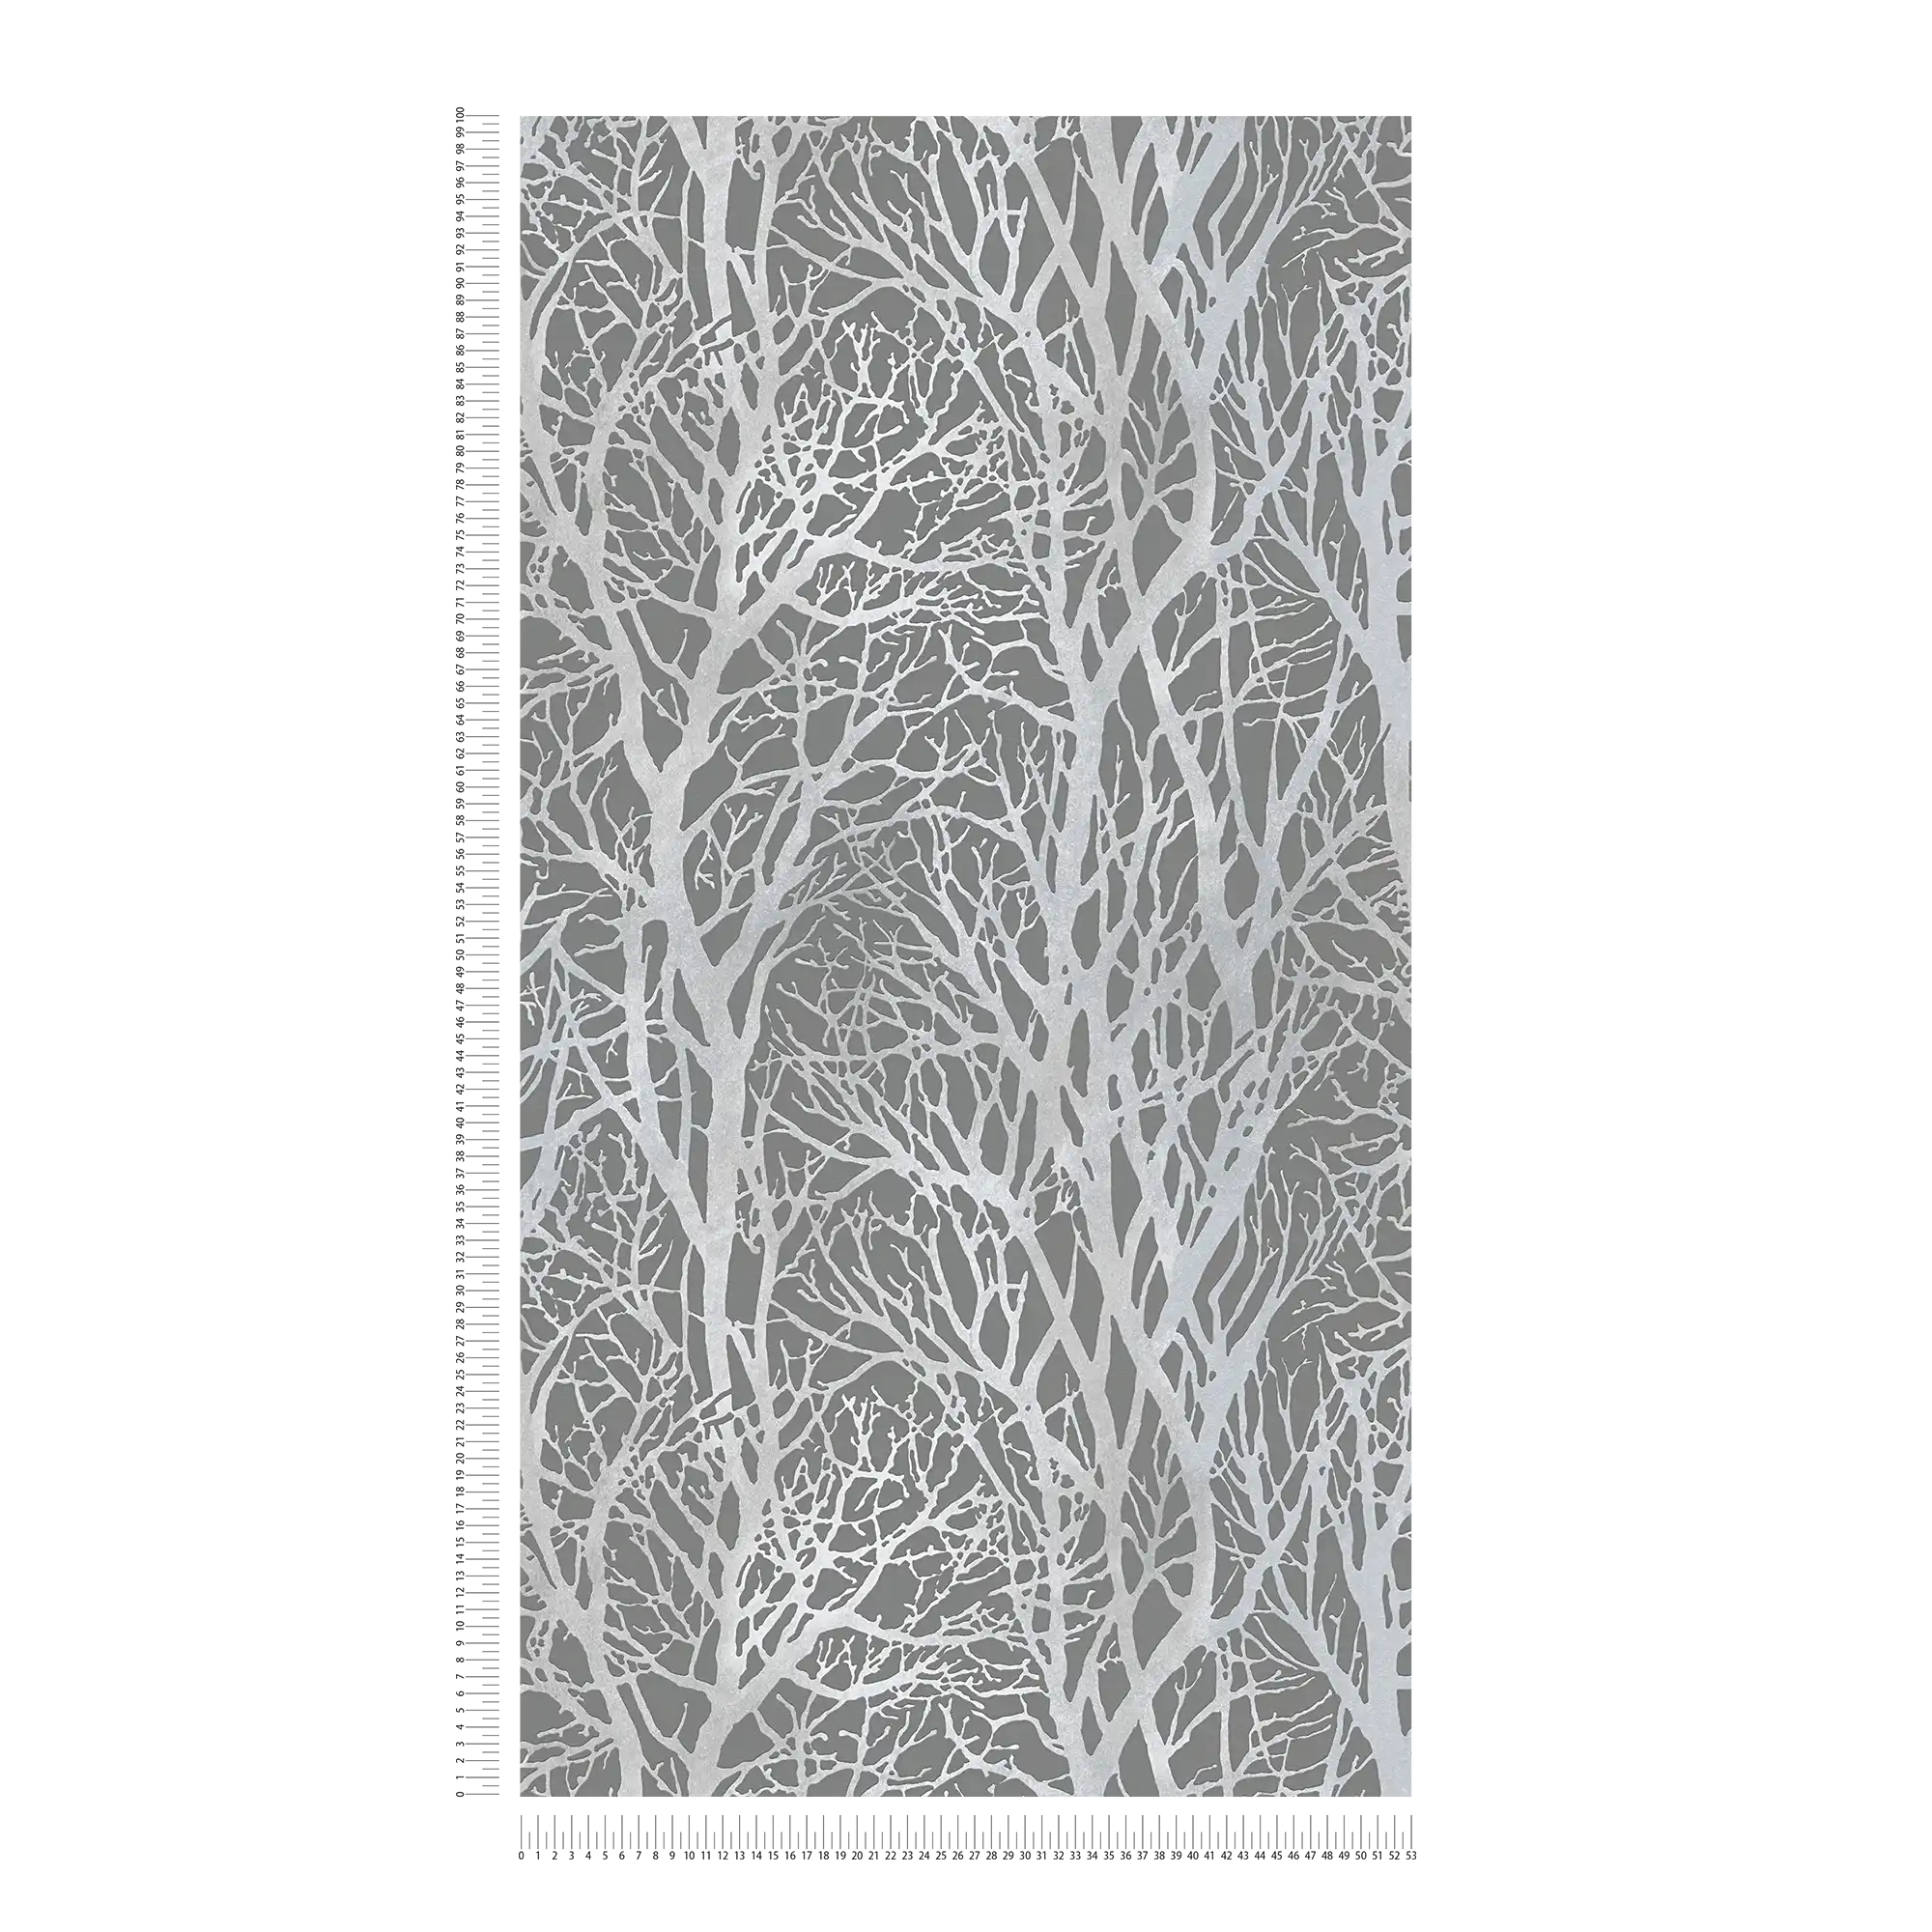             Anthracite wallpaper with branch motif & metallic effect - silver, grey
        